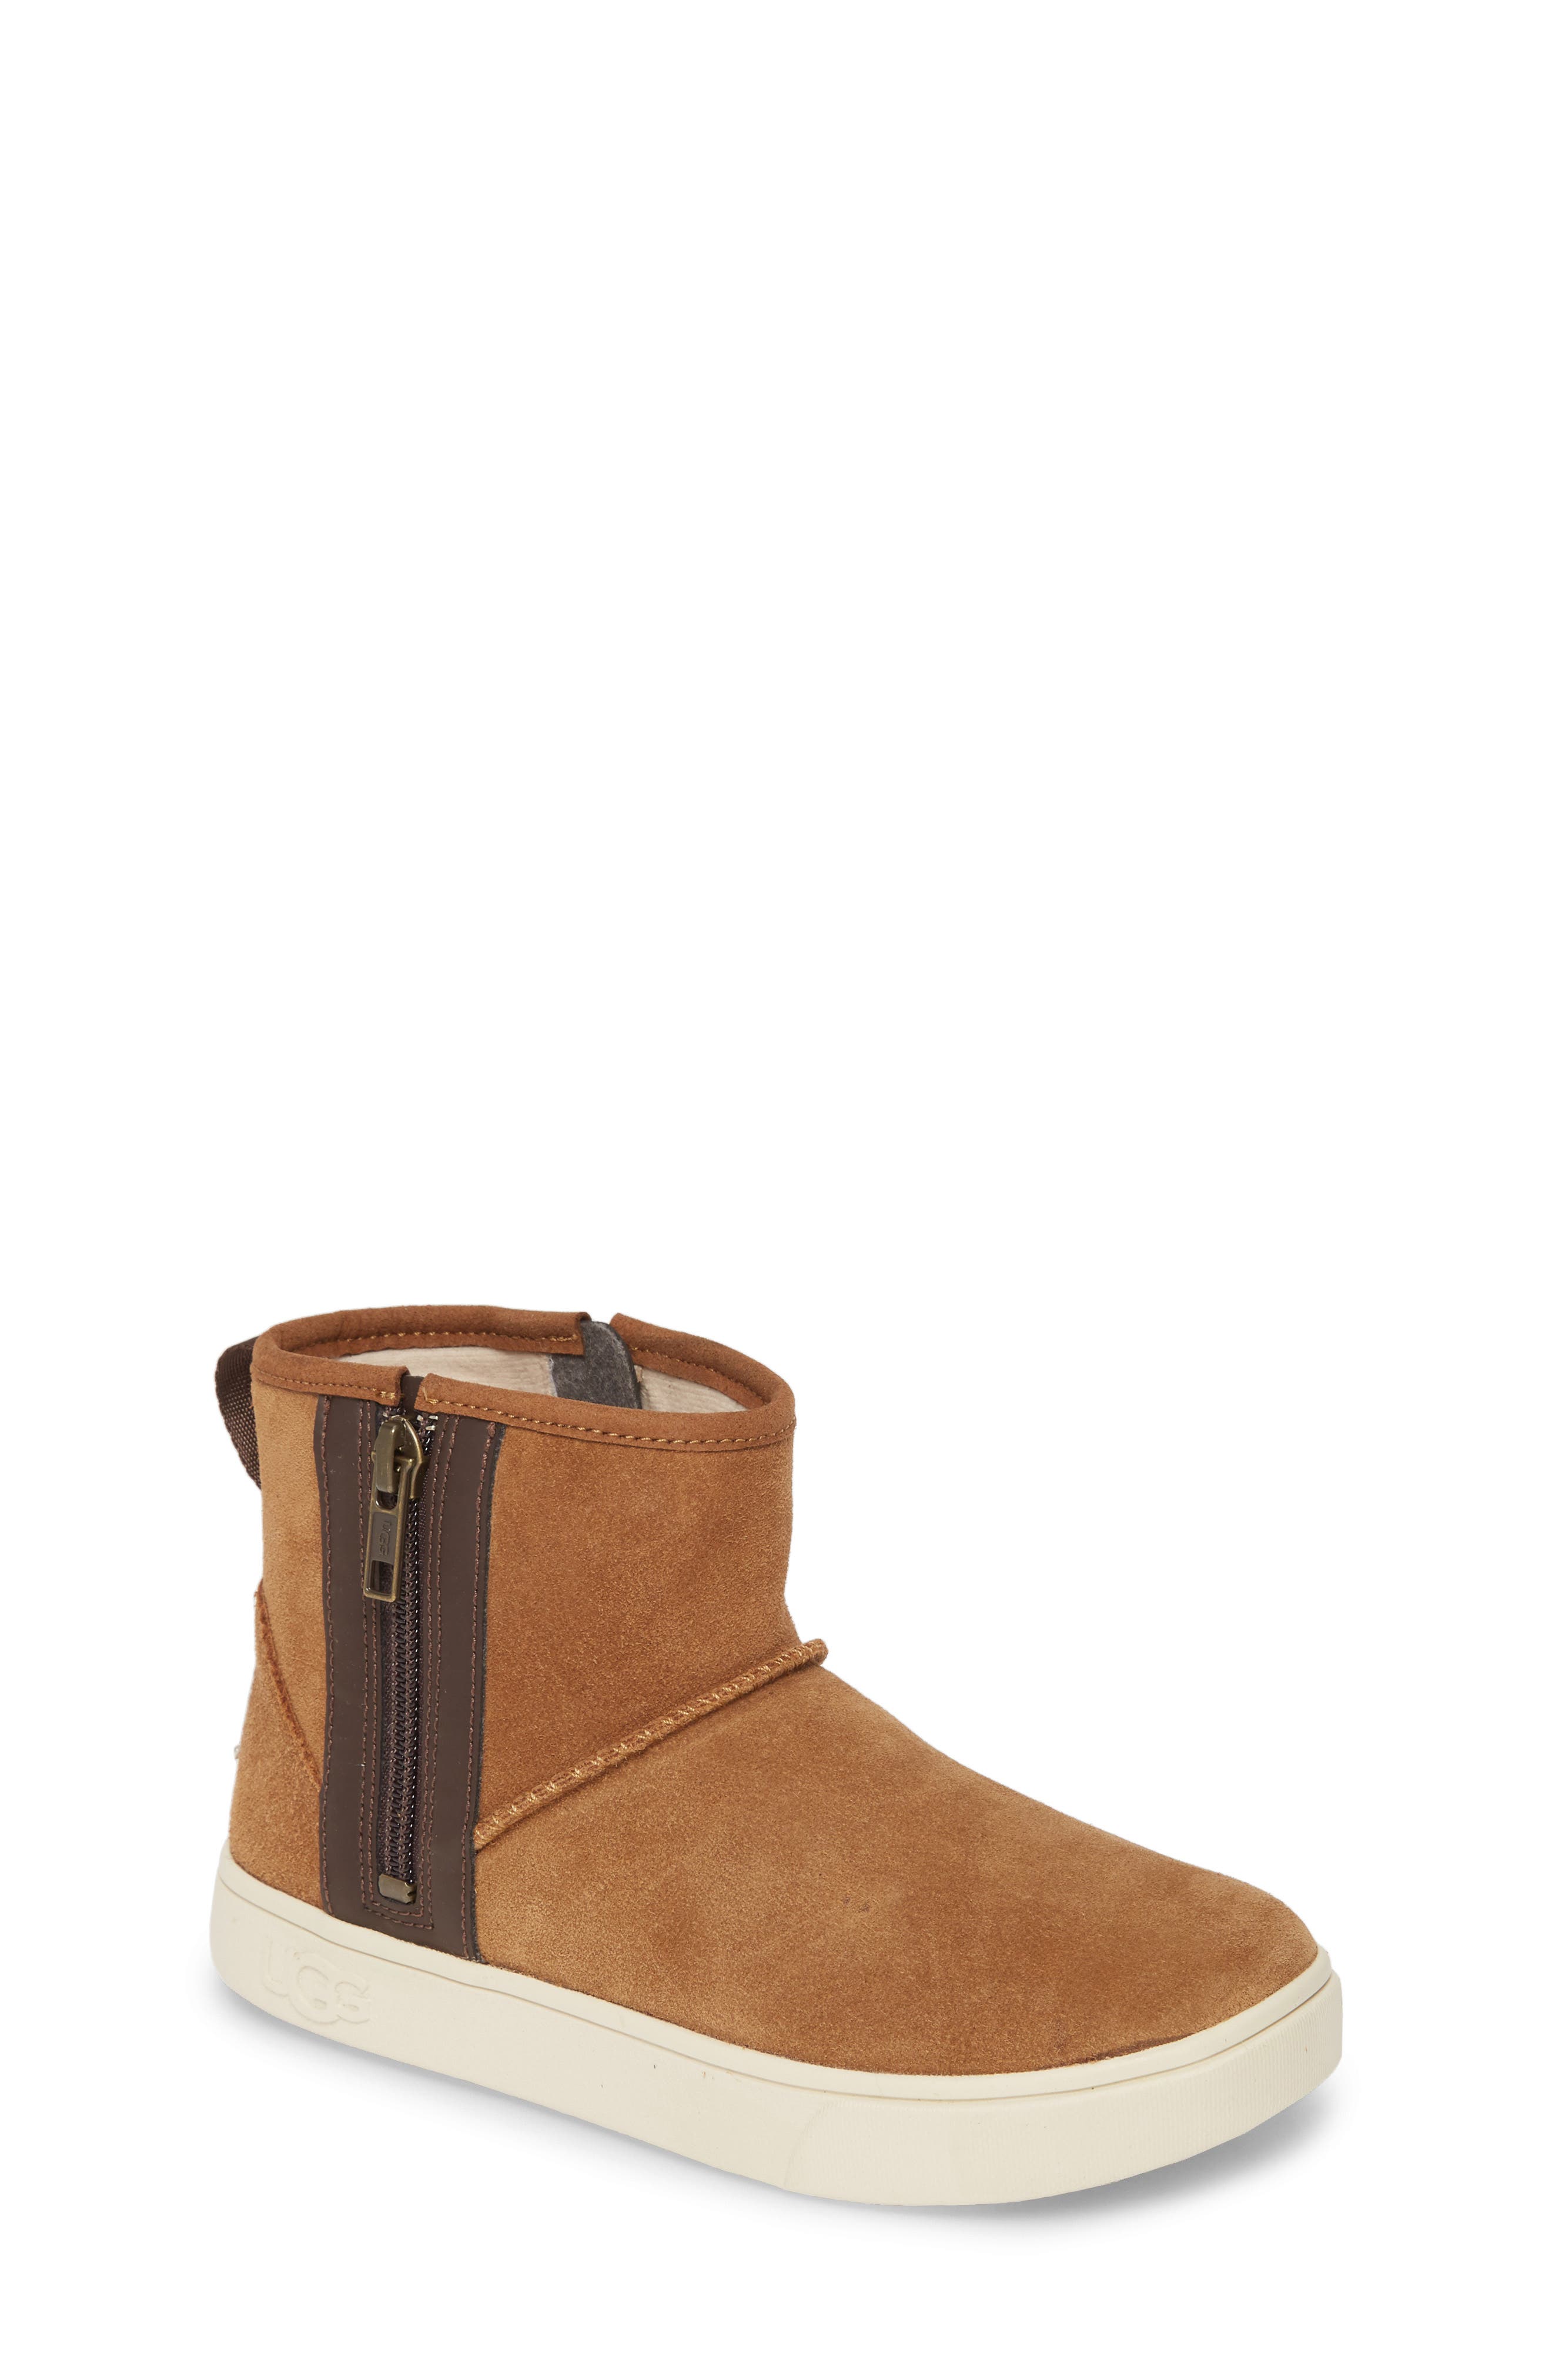 bethany uggs nordstrom